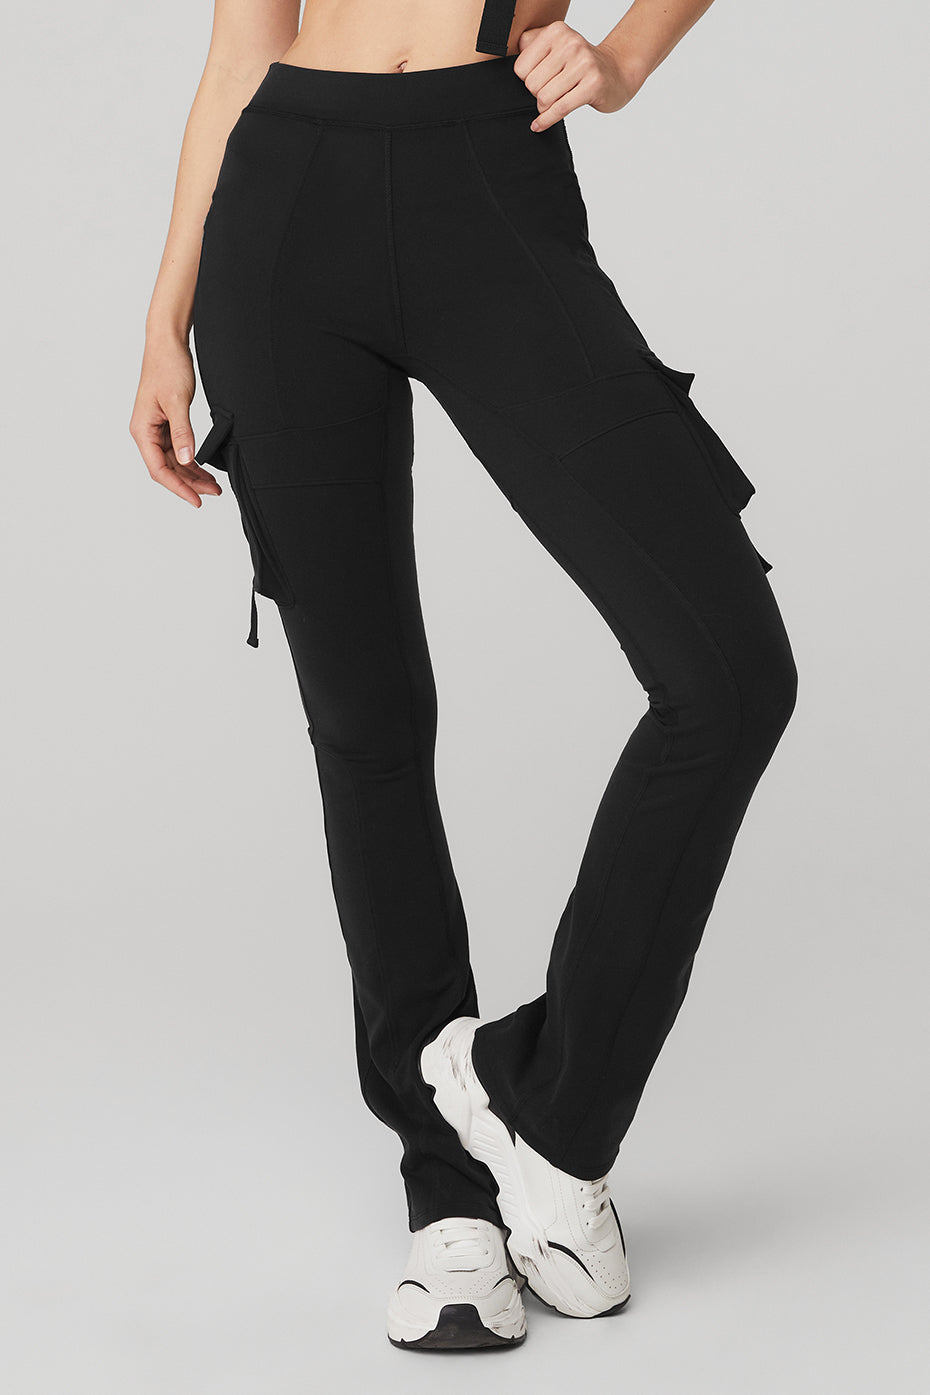 High-Waist Catch The Vibe Flare Legging in Black by Alo Yoga - Work Well  Daily